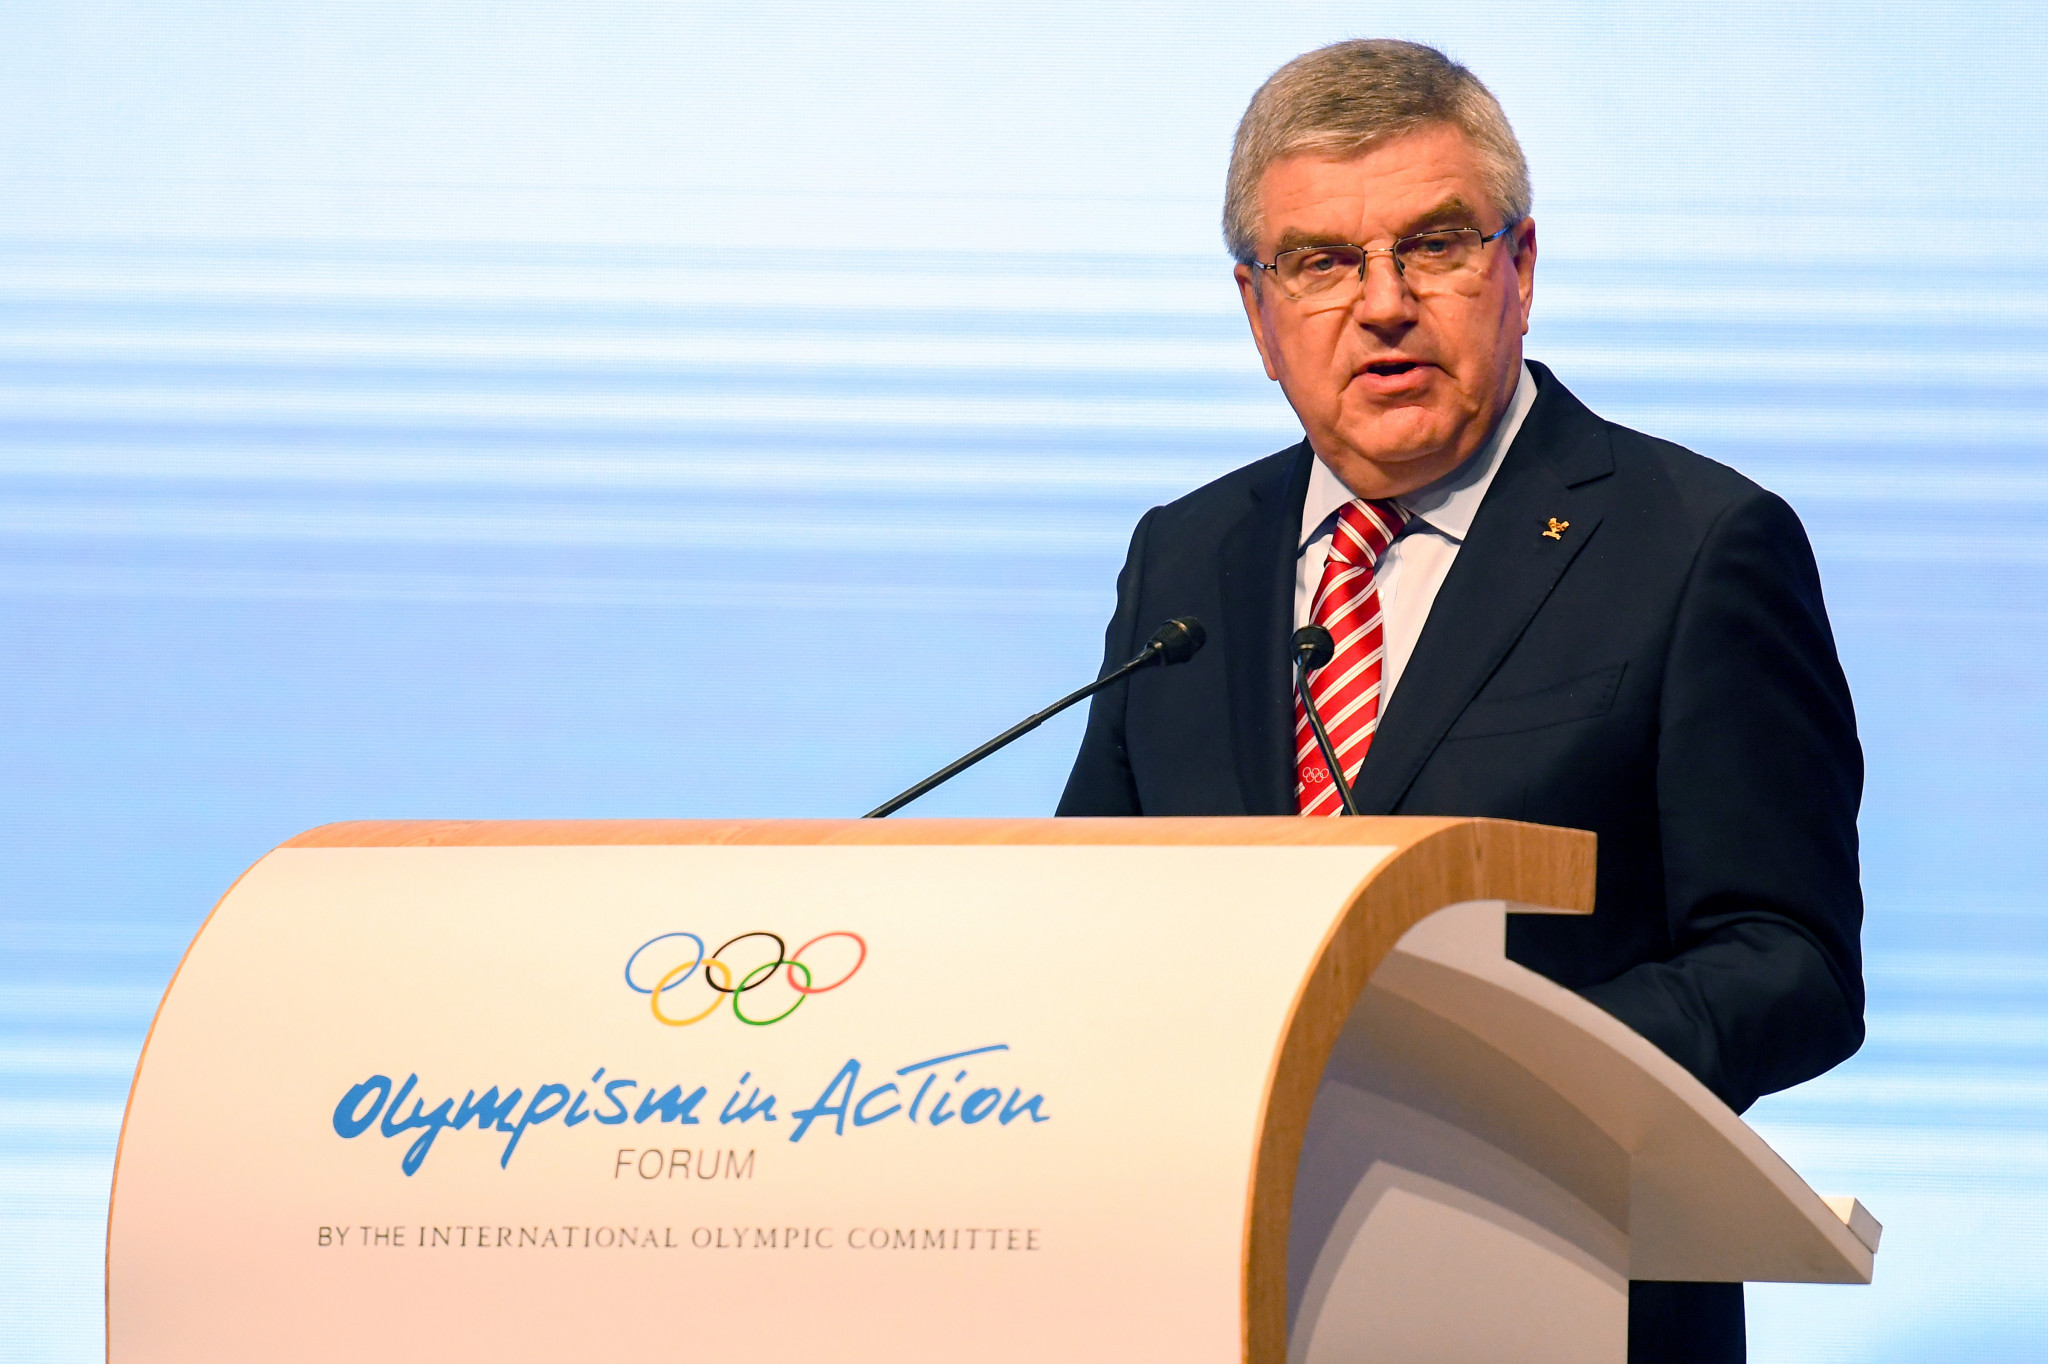 IOC President Thomas Bach opened the Forum ©Getty Images